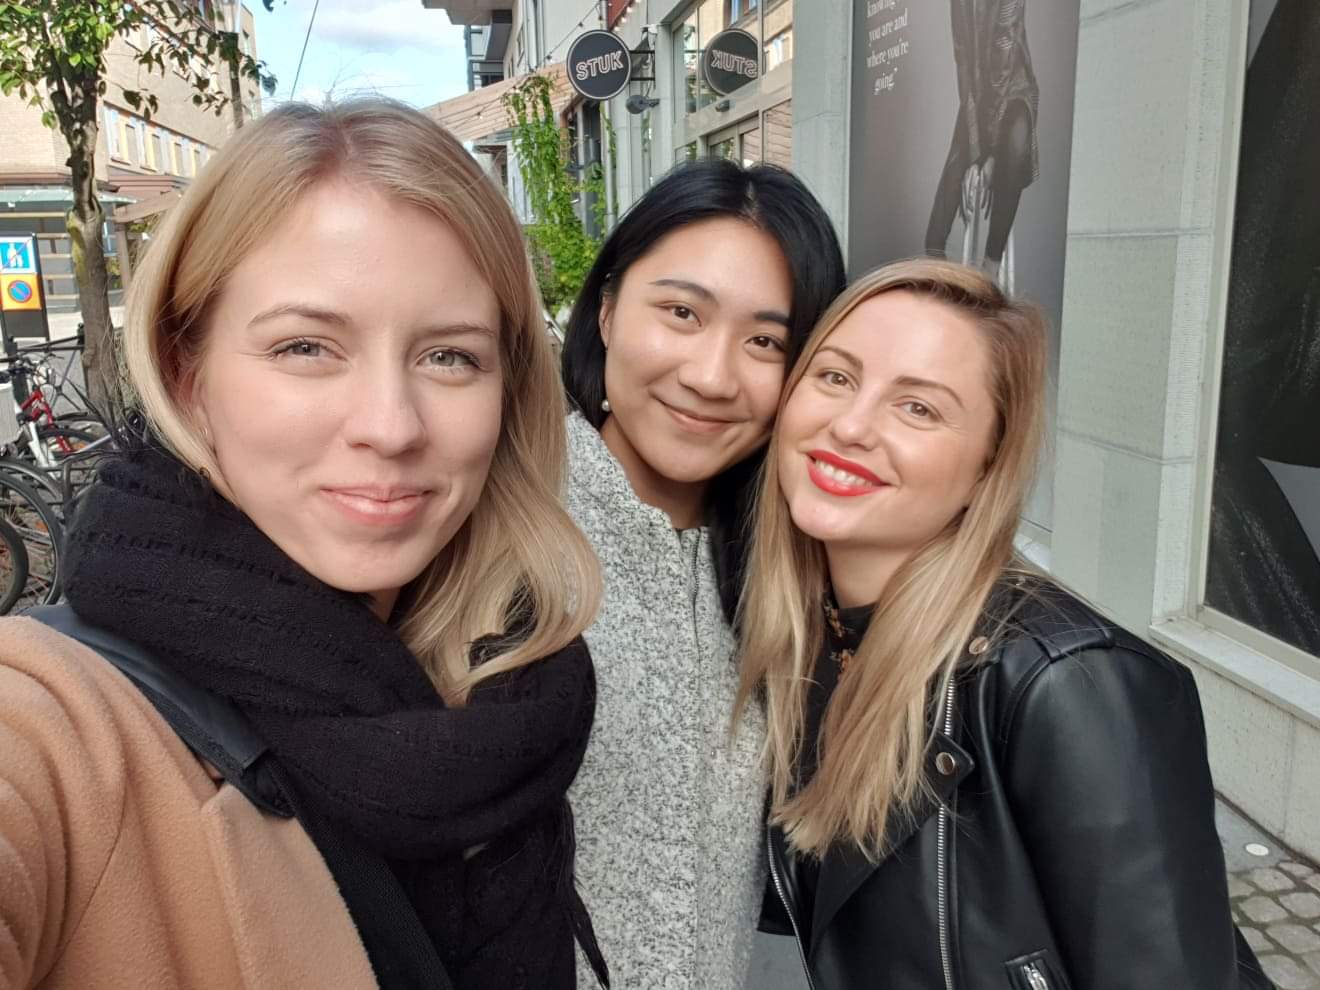 Grace Ma (in the middle) who studied the New Media Design programme at the School of Engineering, Jönköping University. Here she is seen with her former classmates Loredana Rusu and Tilda Alnervik.